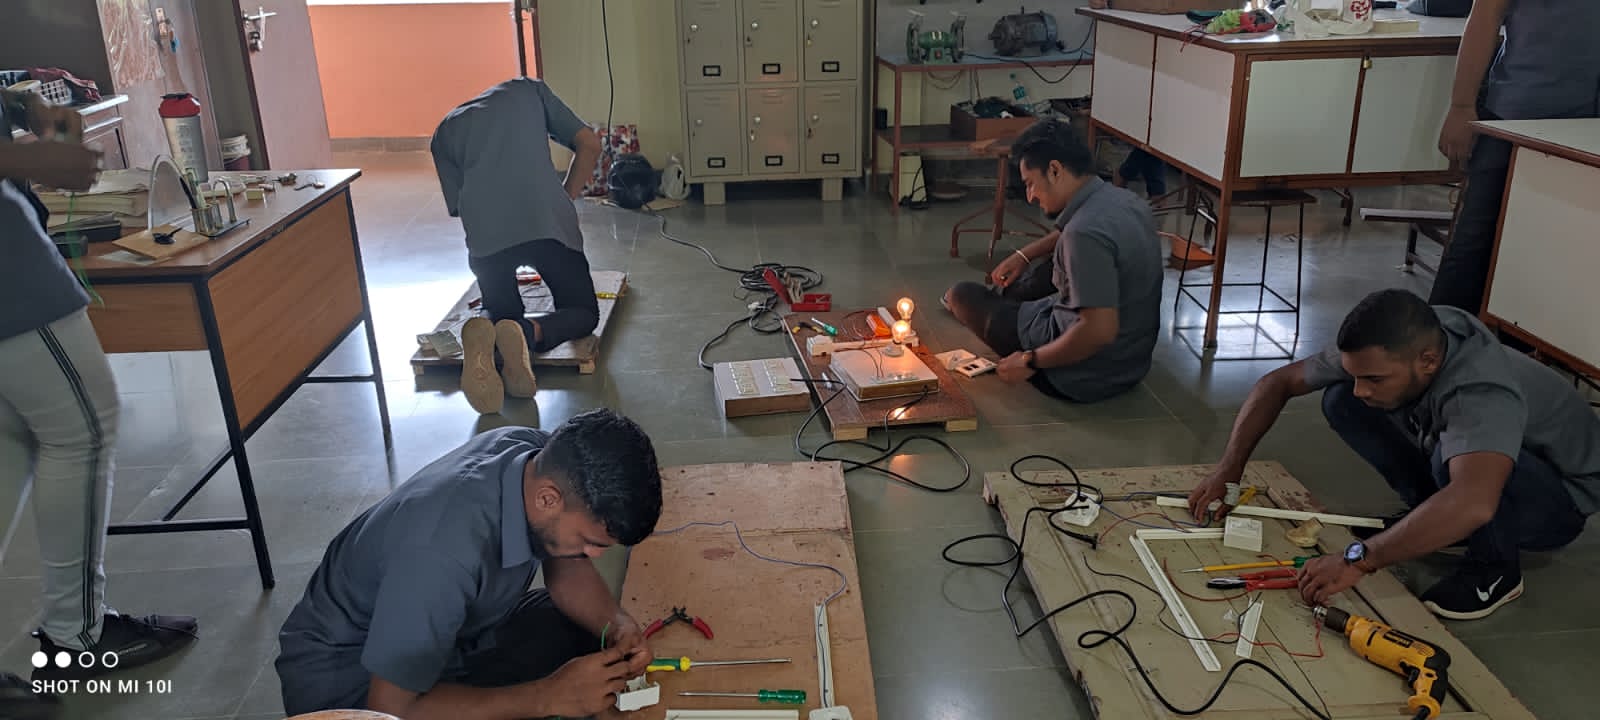 The course is designed to give students hands-on experience practicing electrical activities. 